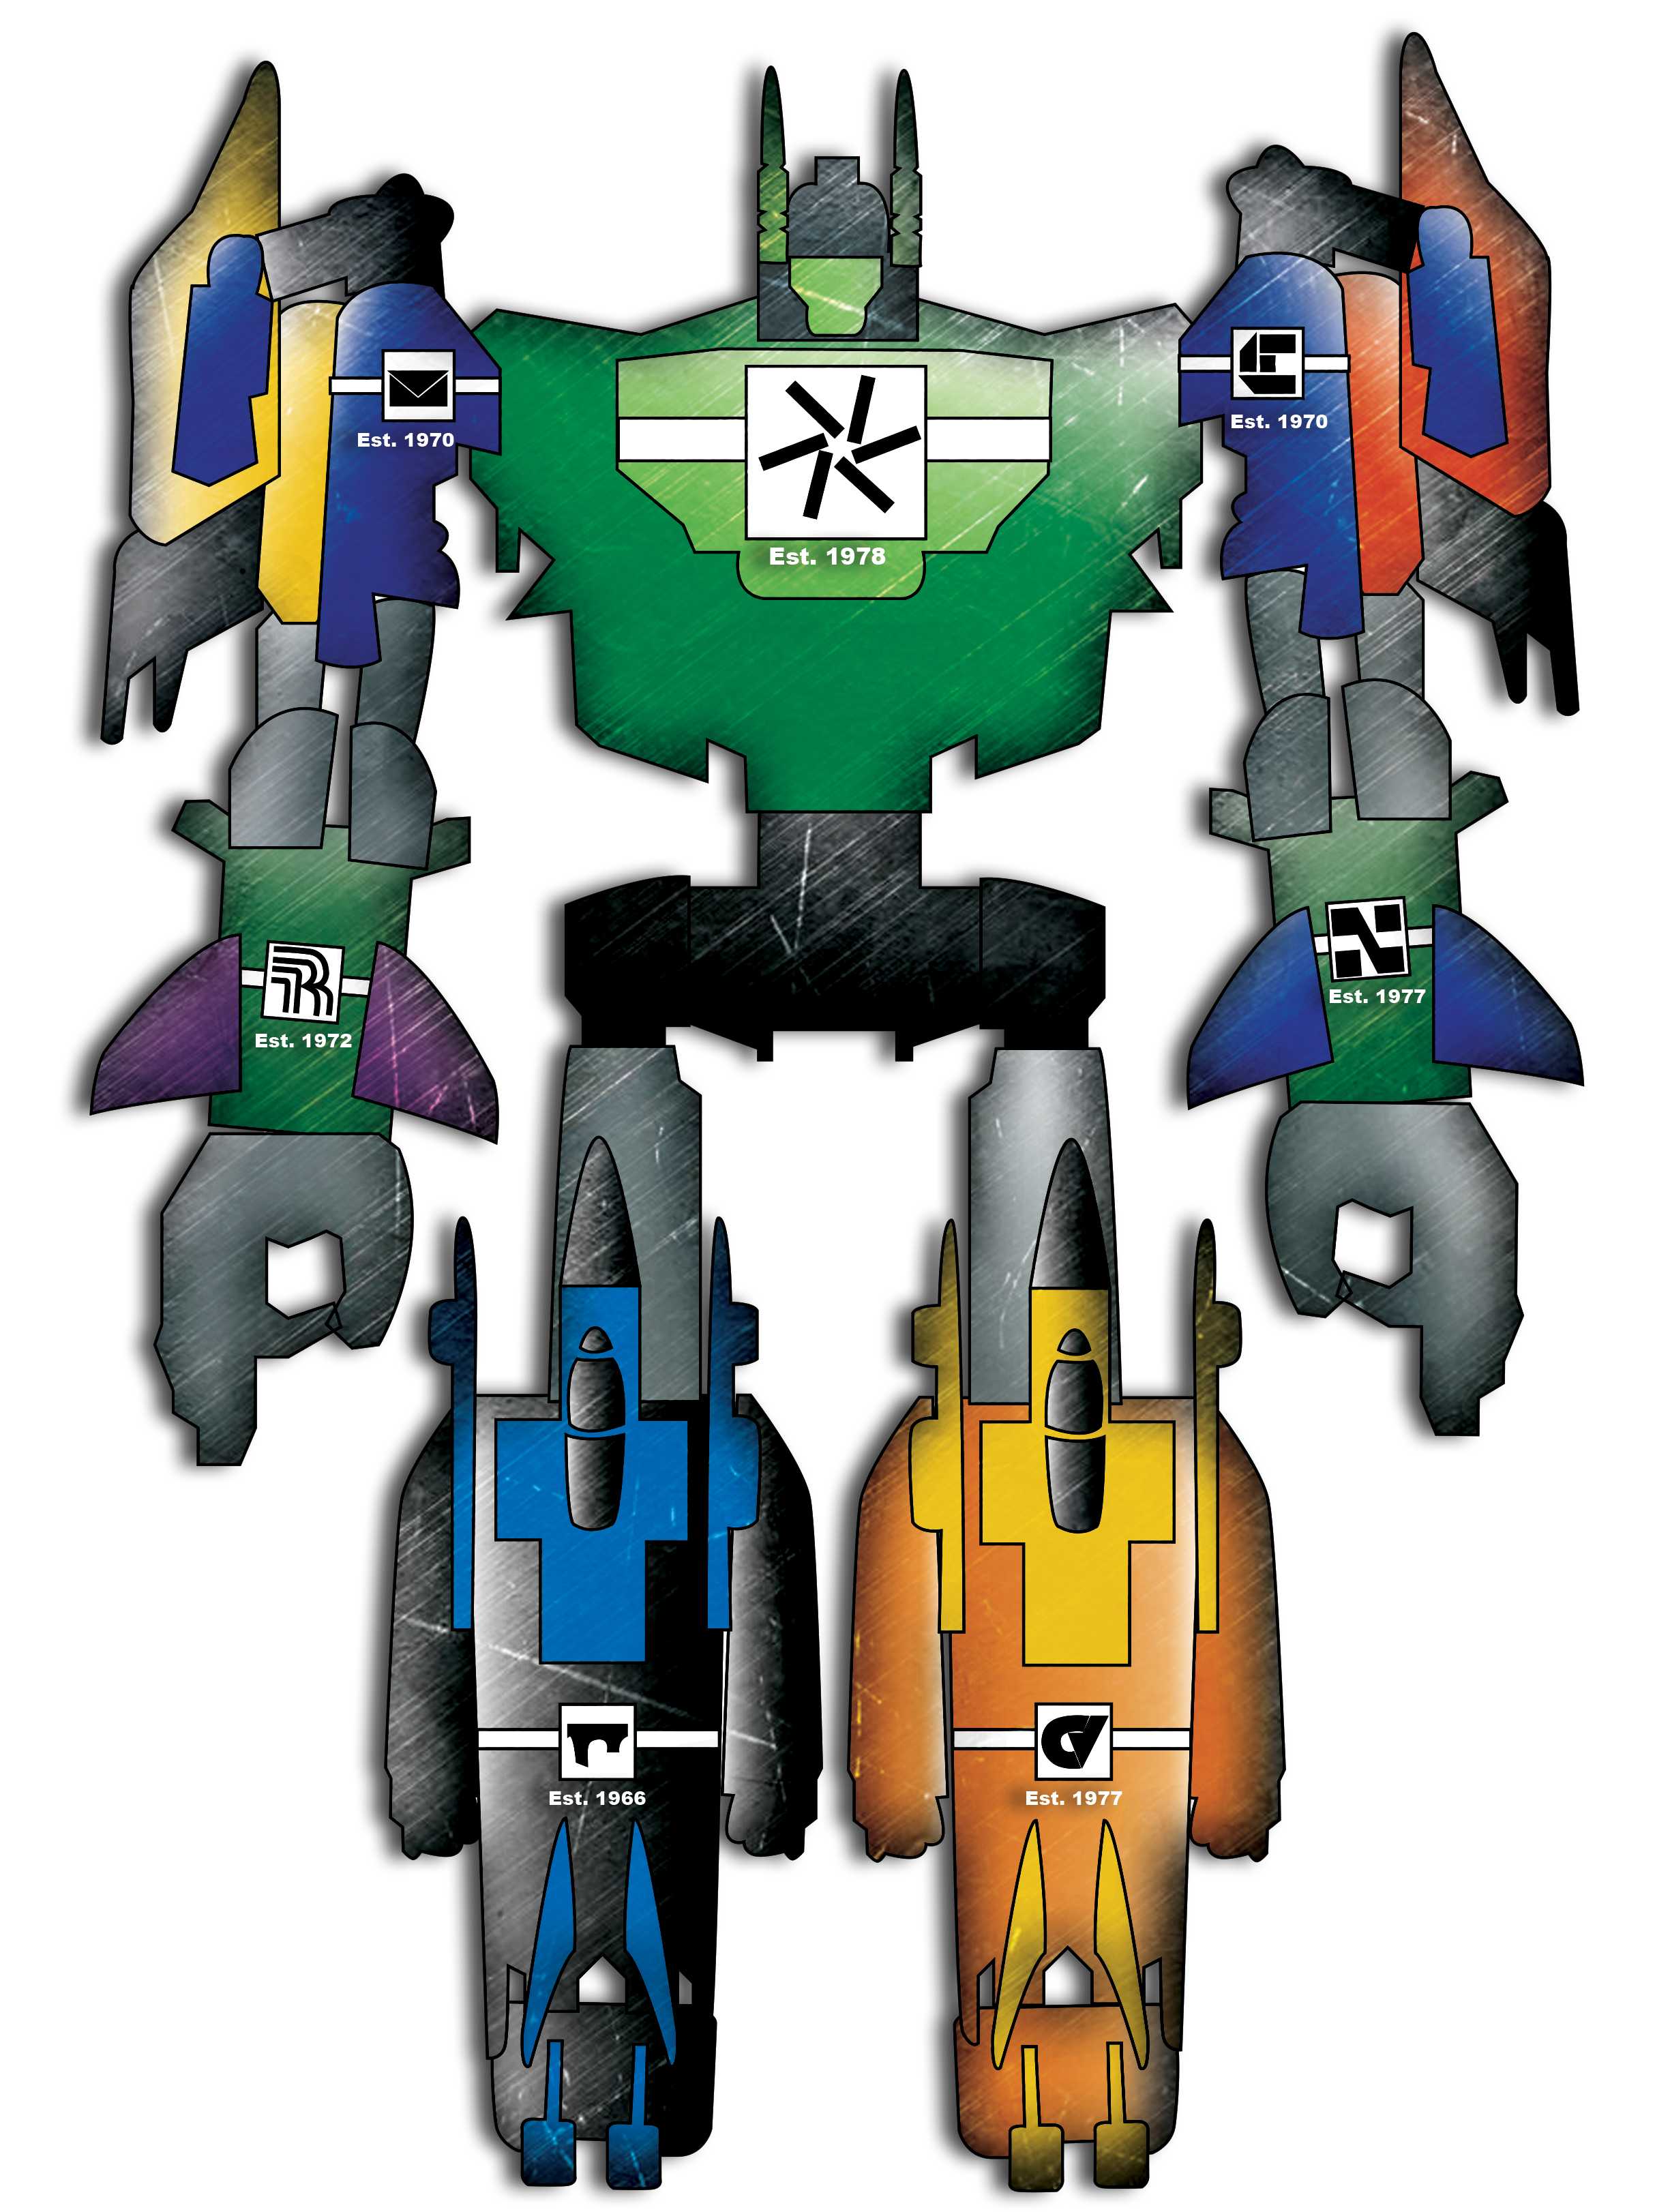 The Megazord giant robot from the Power Rangers animated series, but each limb or segment of a limb is painted in the colors of one of the DCCCD colleges.